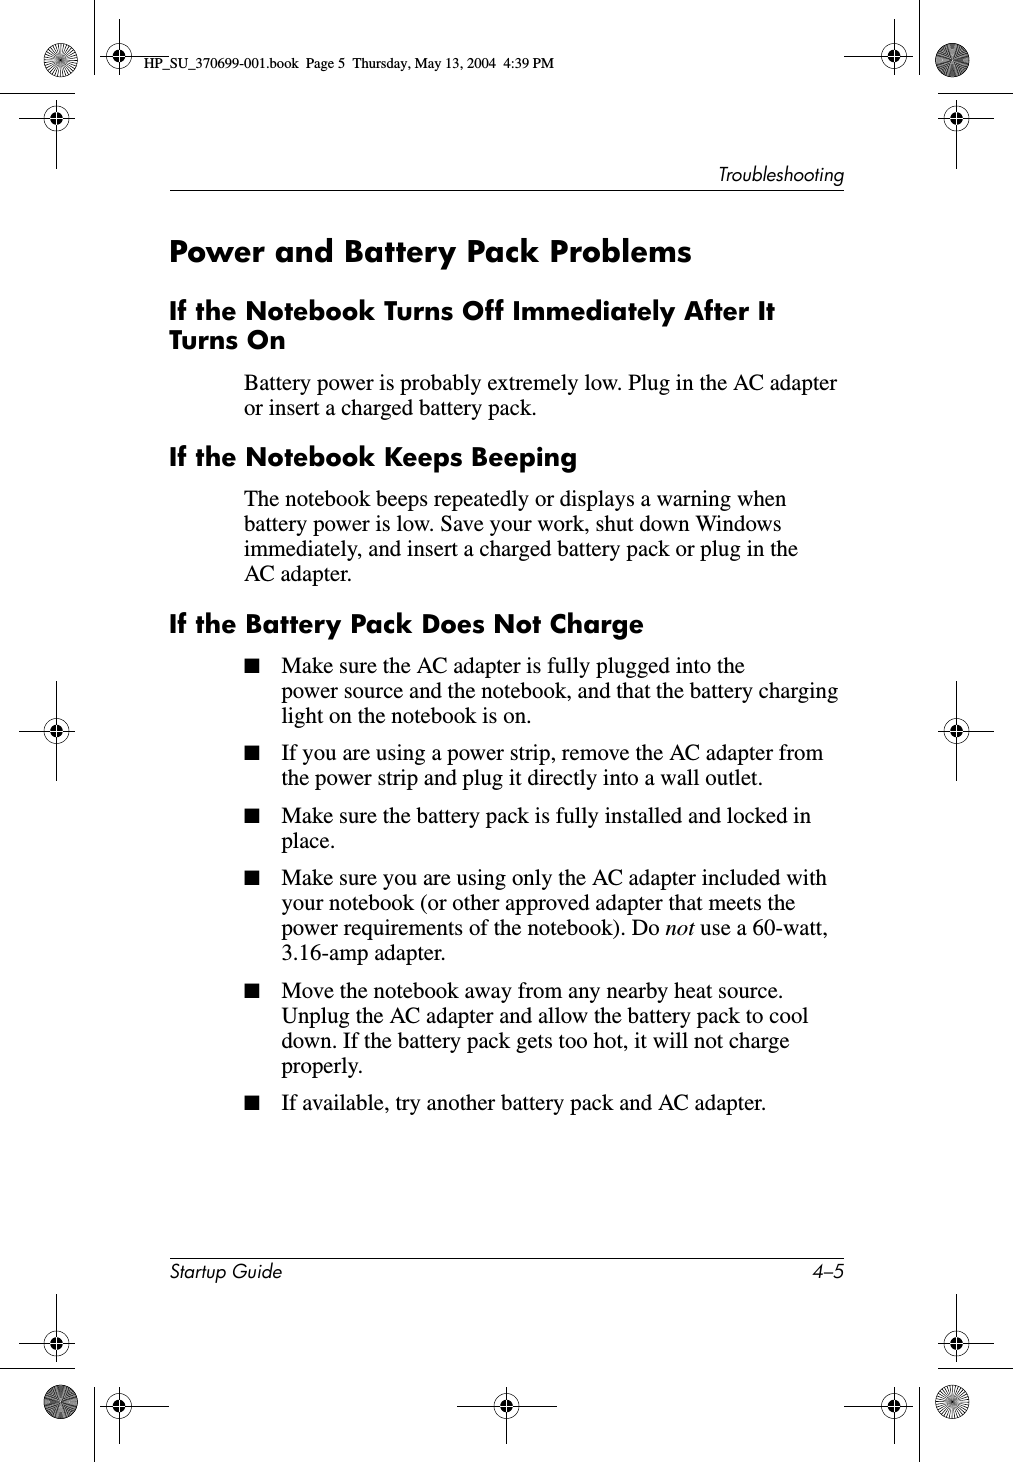 TroubleshootingStartup Guide 4–5Power and Battery Pack ProblemsIf the Notebook Turns Off Immediately After It Turns OnBattery power is probably extremely low. Plug in the AC adapter or insert a charged battery pack. If the Notebook Keeps BeepingThe notebook beeps repeatedly or displays a warning when battery power is low. Save your work, shut down Windows immediately, and insert a charged battery pack or plug in the AC adapter.If the Battery Pack Does Not Charge■Make sure the AC adapter is fully plugged into the power source and the notebook, and that the battery charging light on the notebook is on.■If you are using a power strip, remove the AC adapter from the power strip and plug it directly into a wall outlet.■Make sure the battery pack is fully installed and locked in place.■Make sure you are using only the AC adapter included with your notebook (or other approved adapter that meets the power requirements of the notebook). Do not use a 60-watt, 3.16-amp adapter.■Move the notebook away from any nearby heat source. Unplug the AC adapter and allow the battery pack to cool down. If the battery pack gets too hot, it will not charge properly.■If available, try another battery pack and AC adapter.HP_SU_370699-001.book  Page 5  Thursday, May 13, 2004  4:39 PM